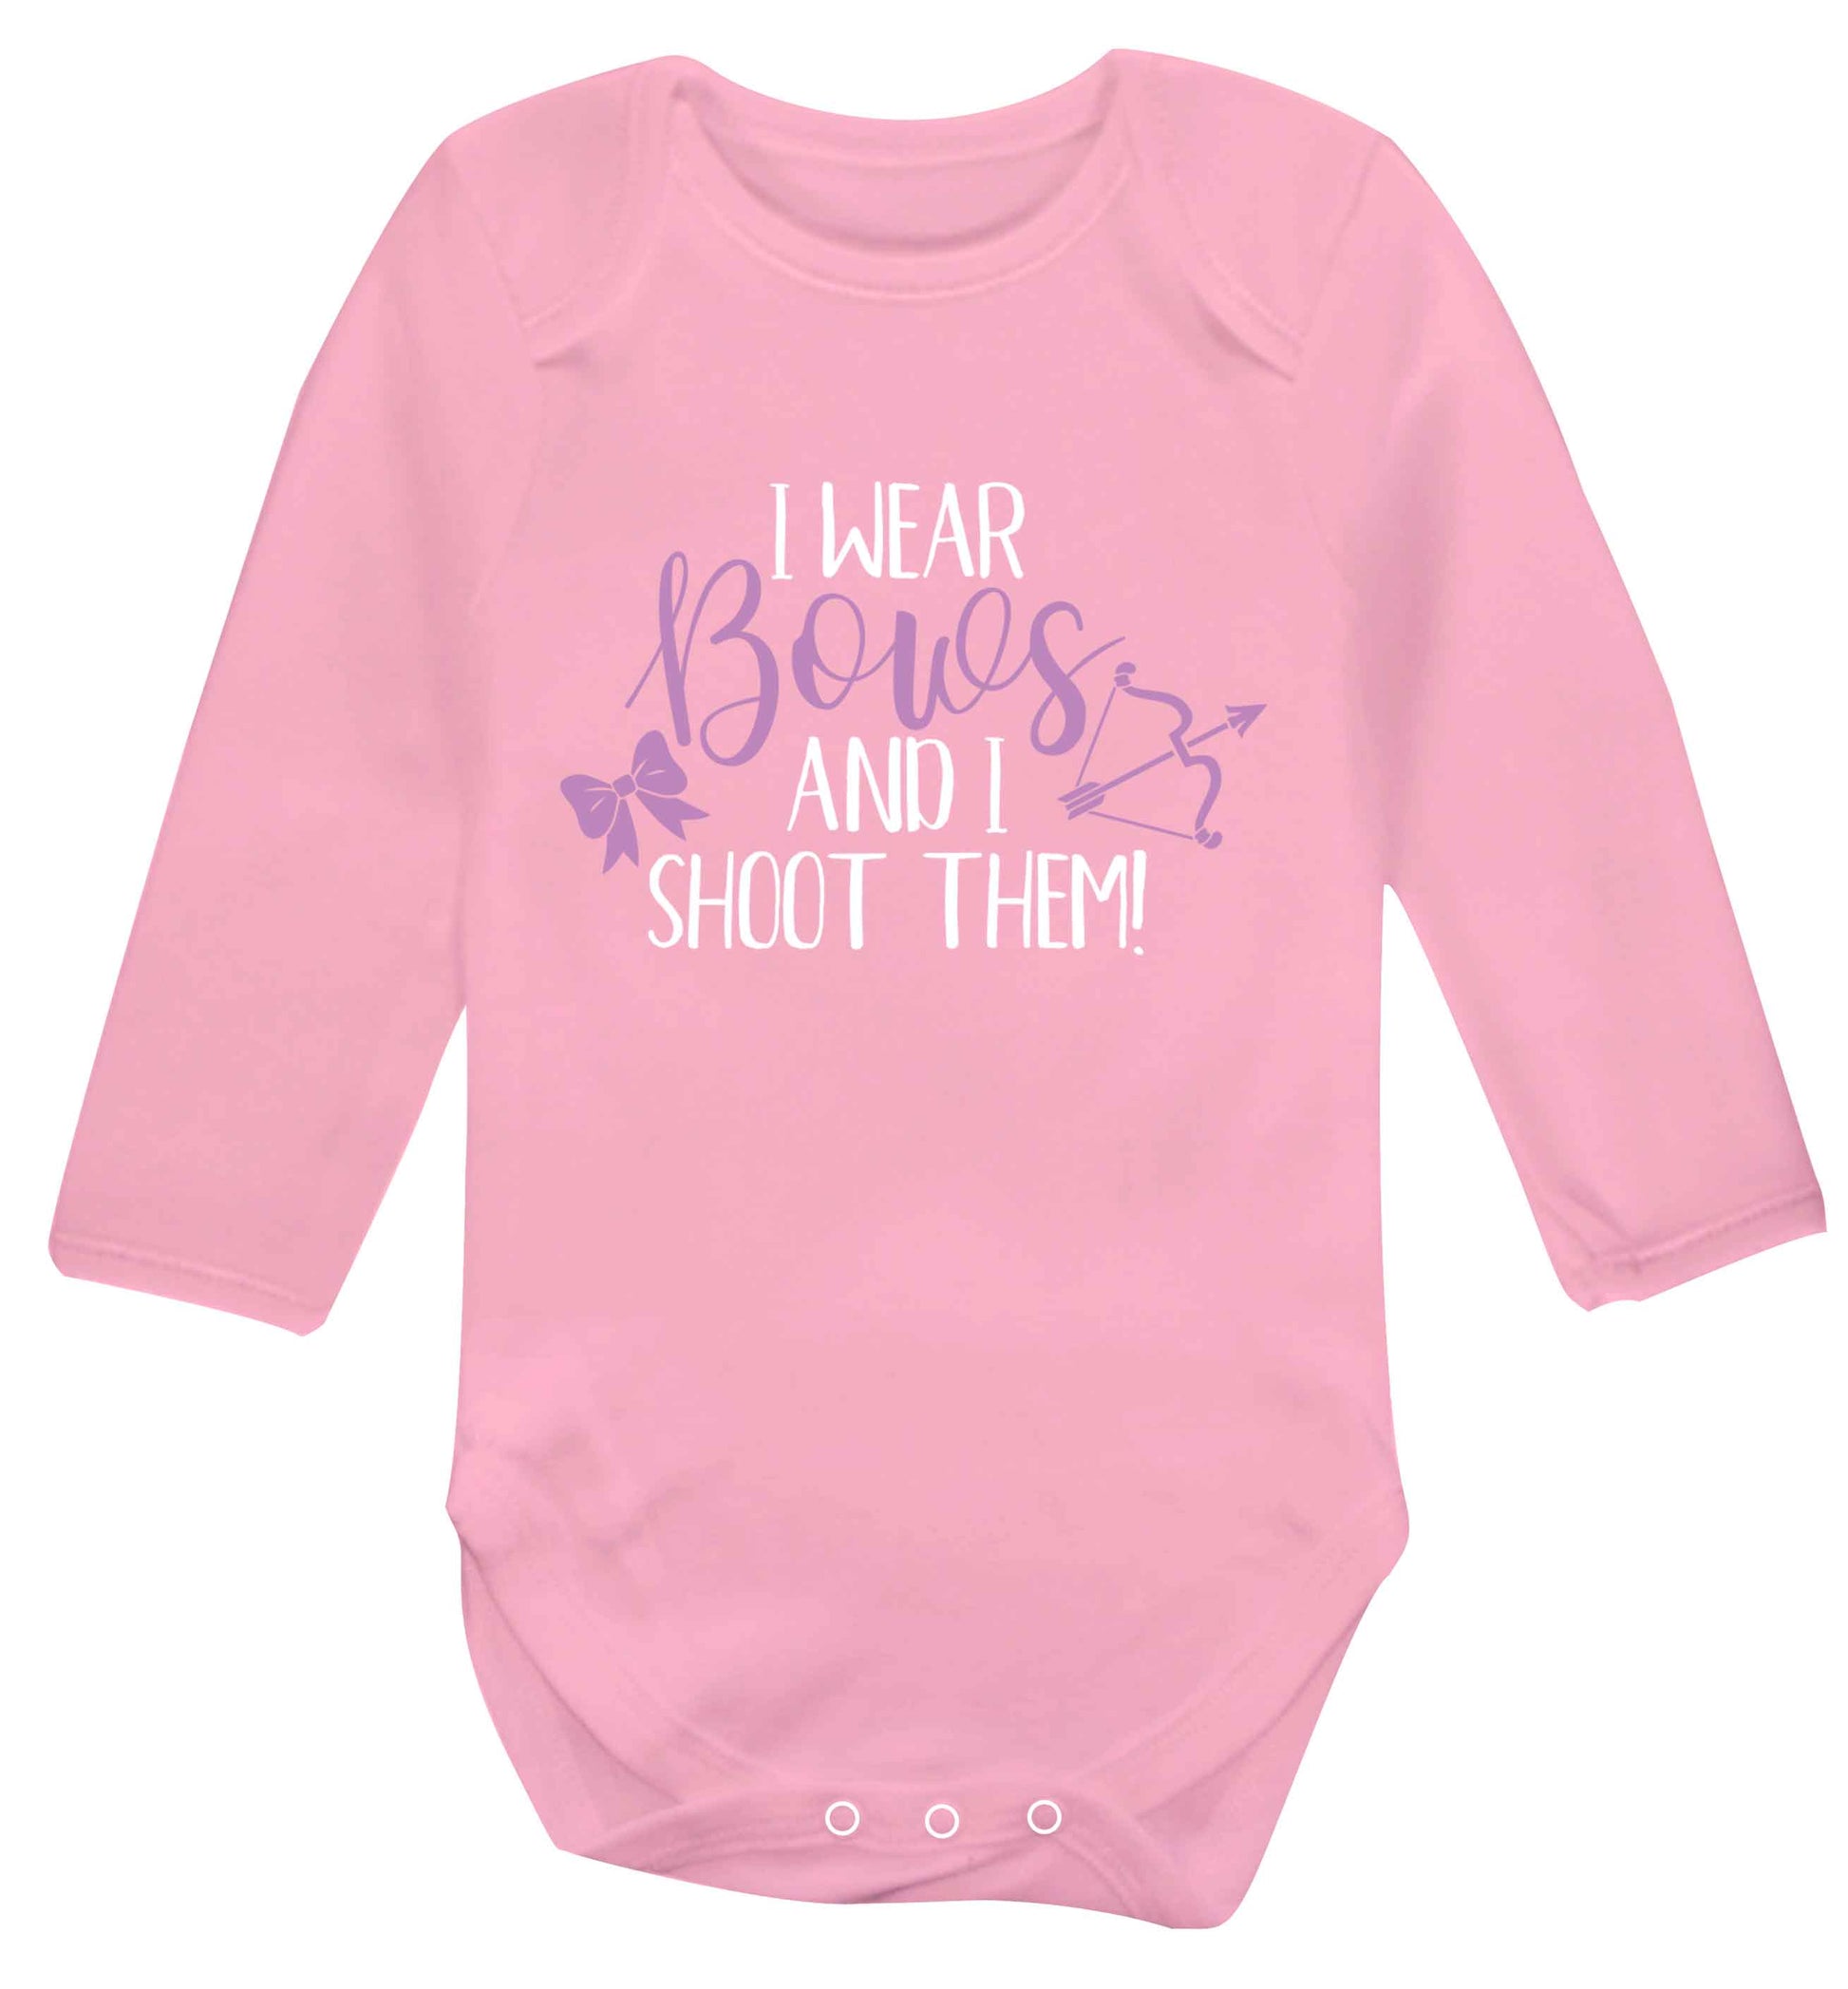 I wear bows and I shoot them Baby Vest long sleeved pale pink 6-12 months